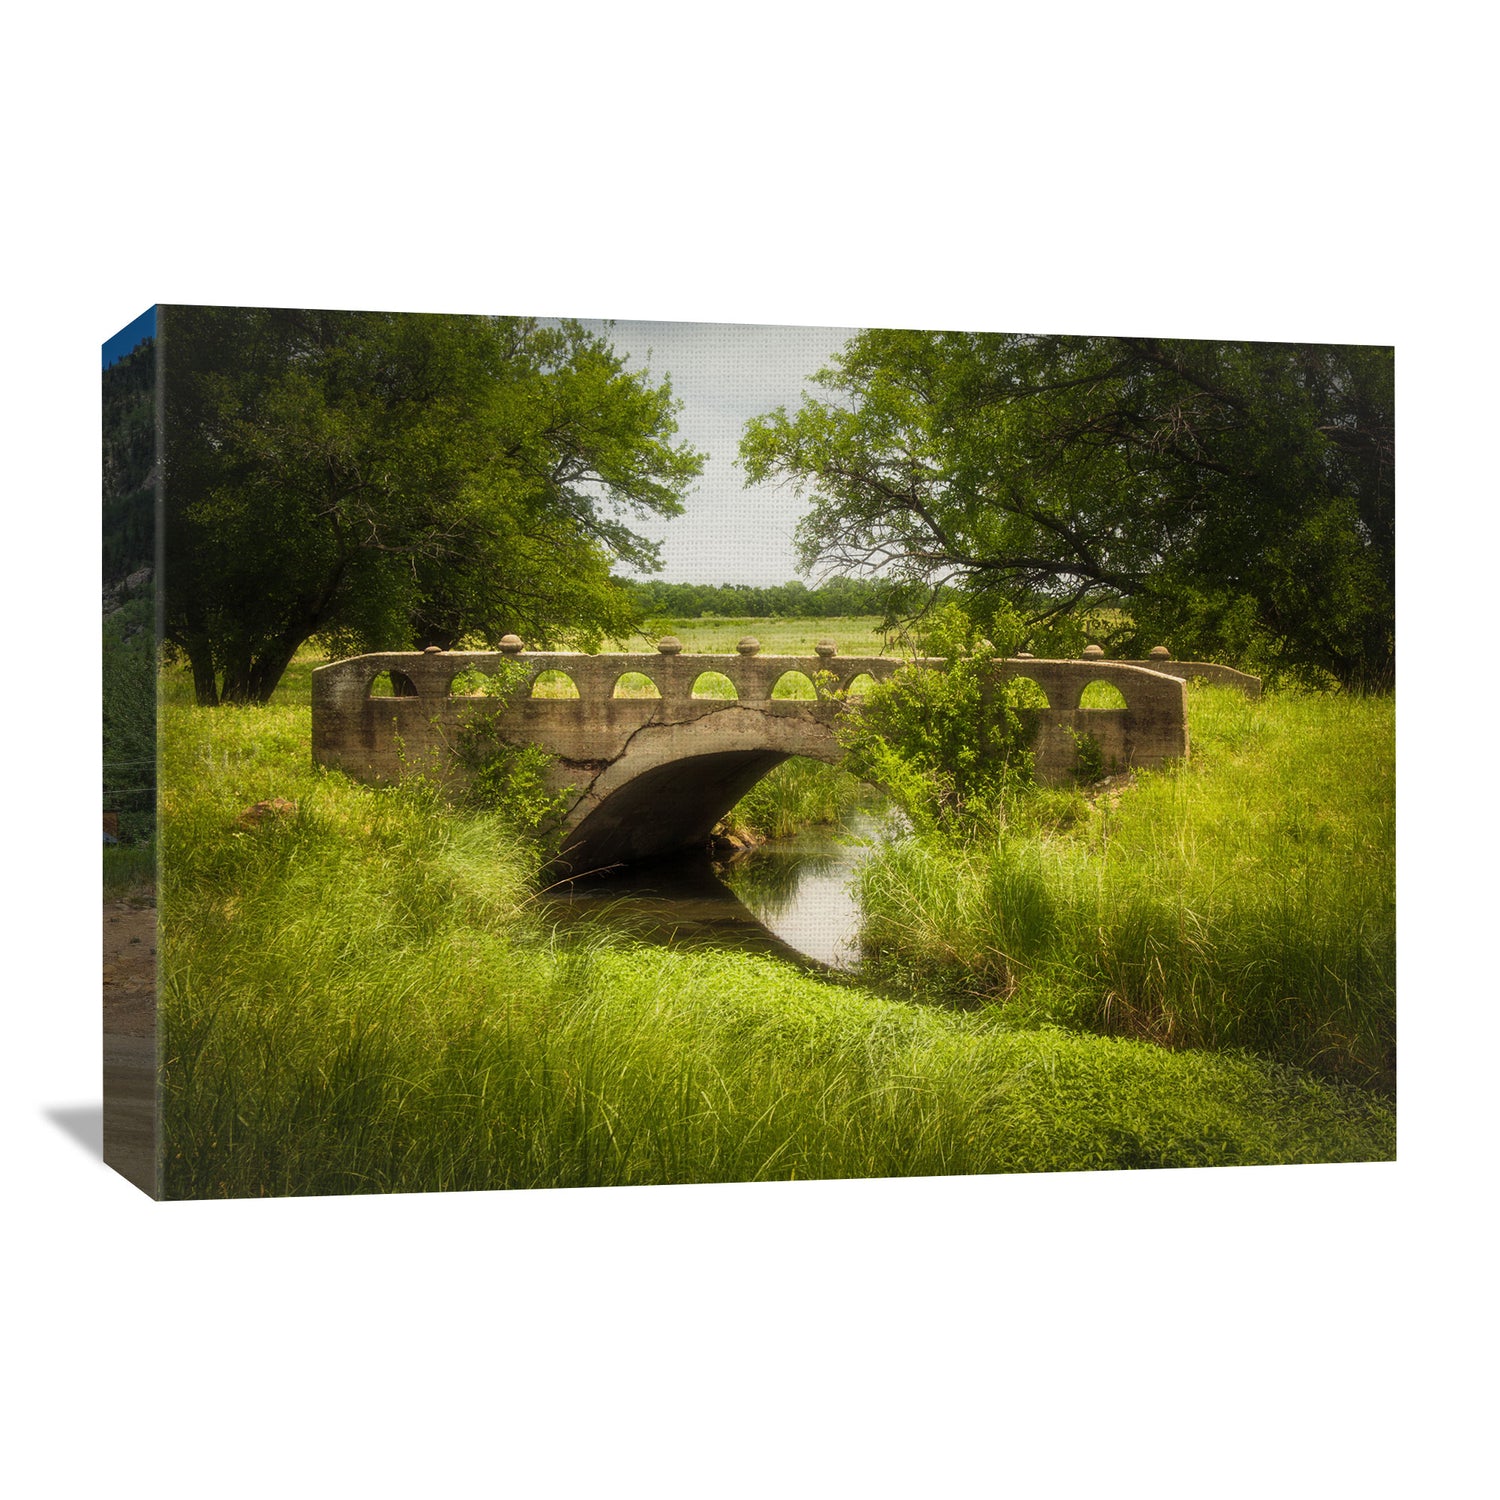 Vivid canvas art presenting a meticulously crafted image of a Kansas bridge, blending architectural beauty with the tranquility of nature.